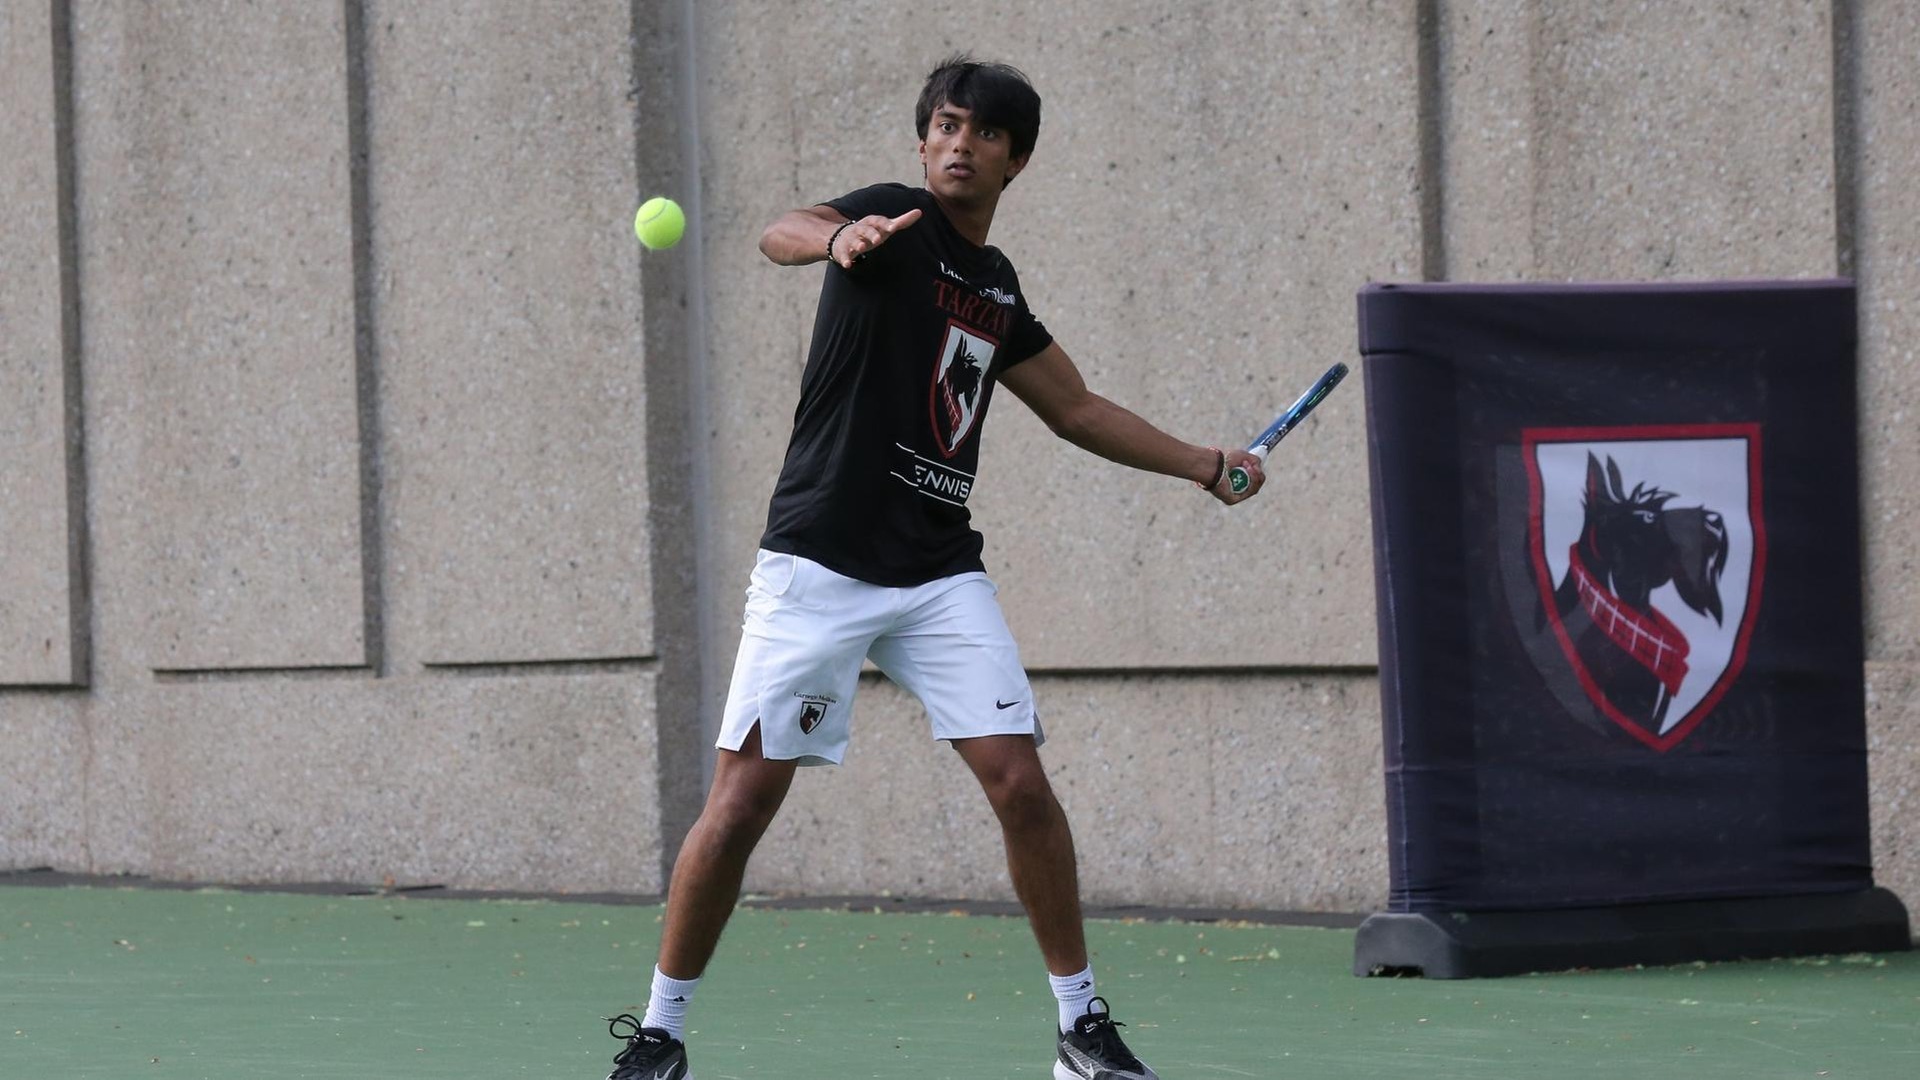 men's tennis player wearing a black shirt and white shorts swings racquet at the ball